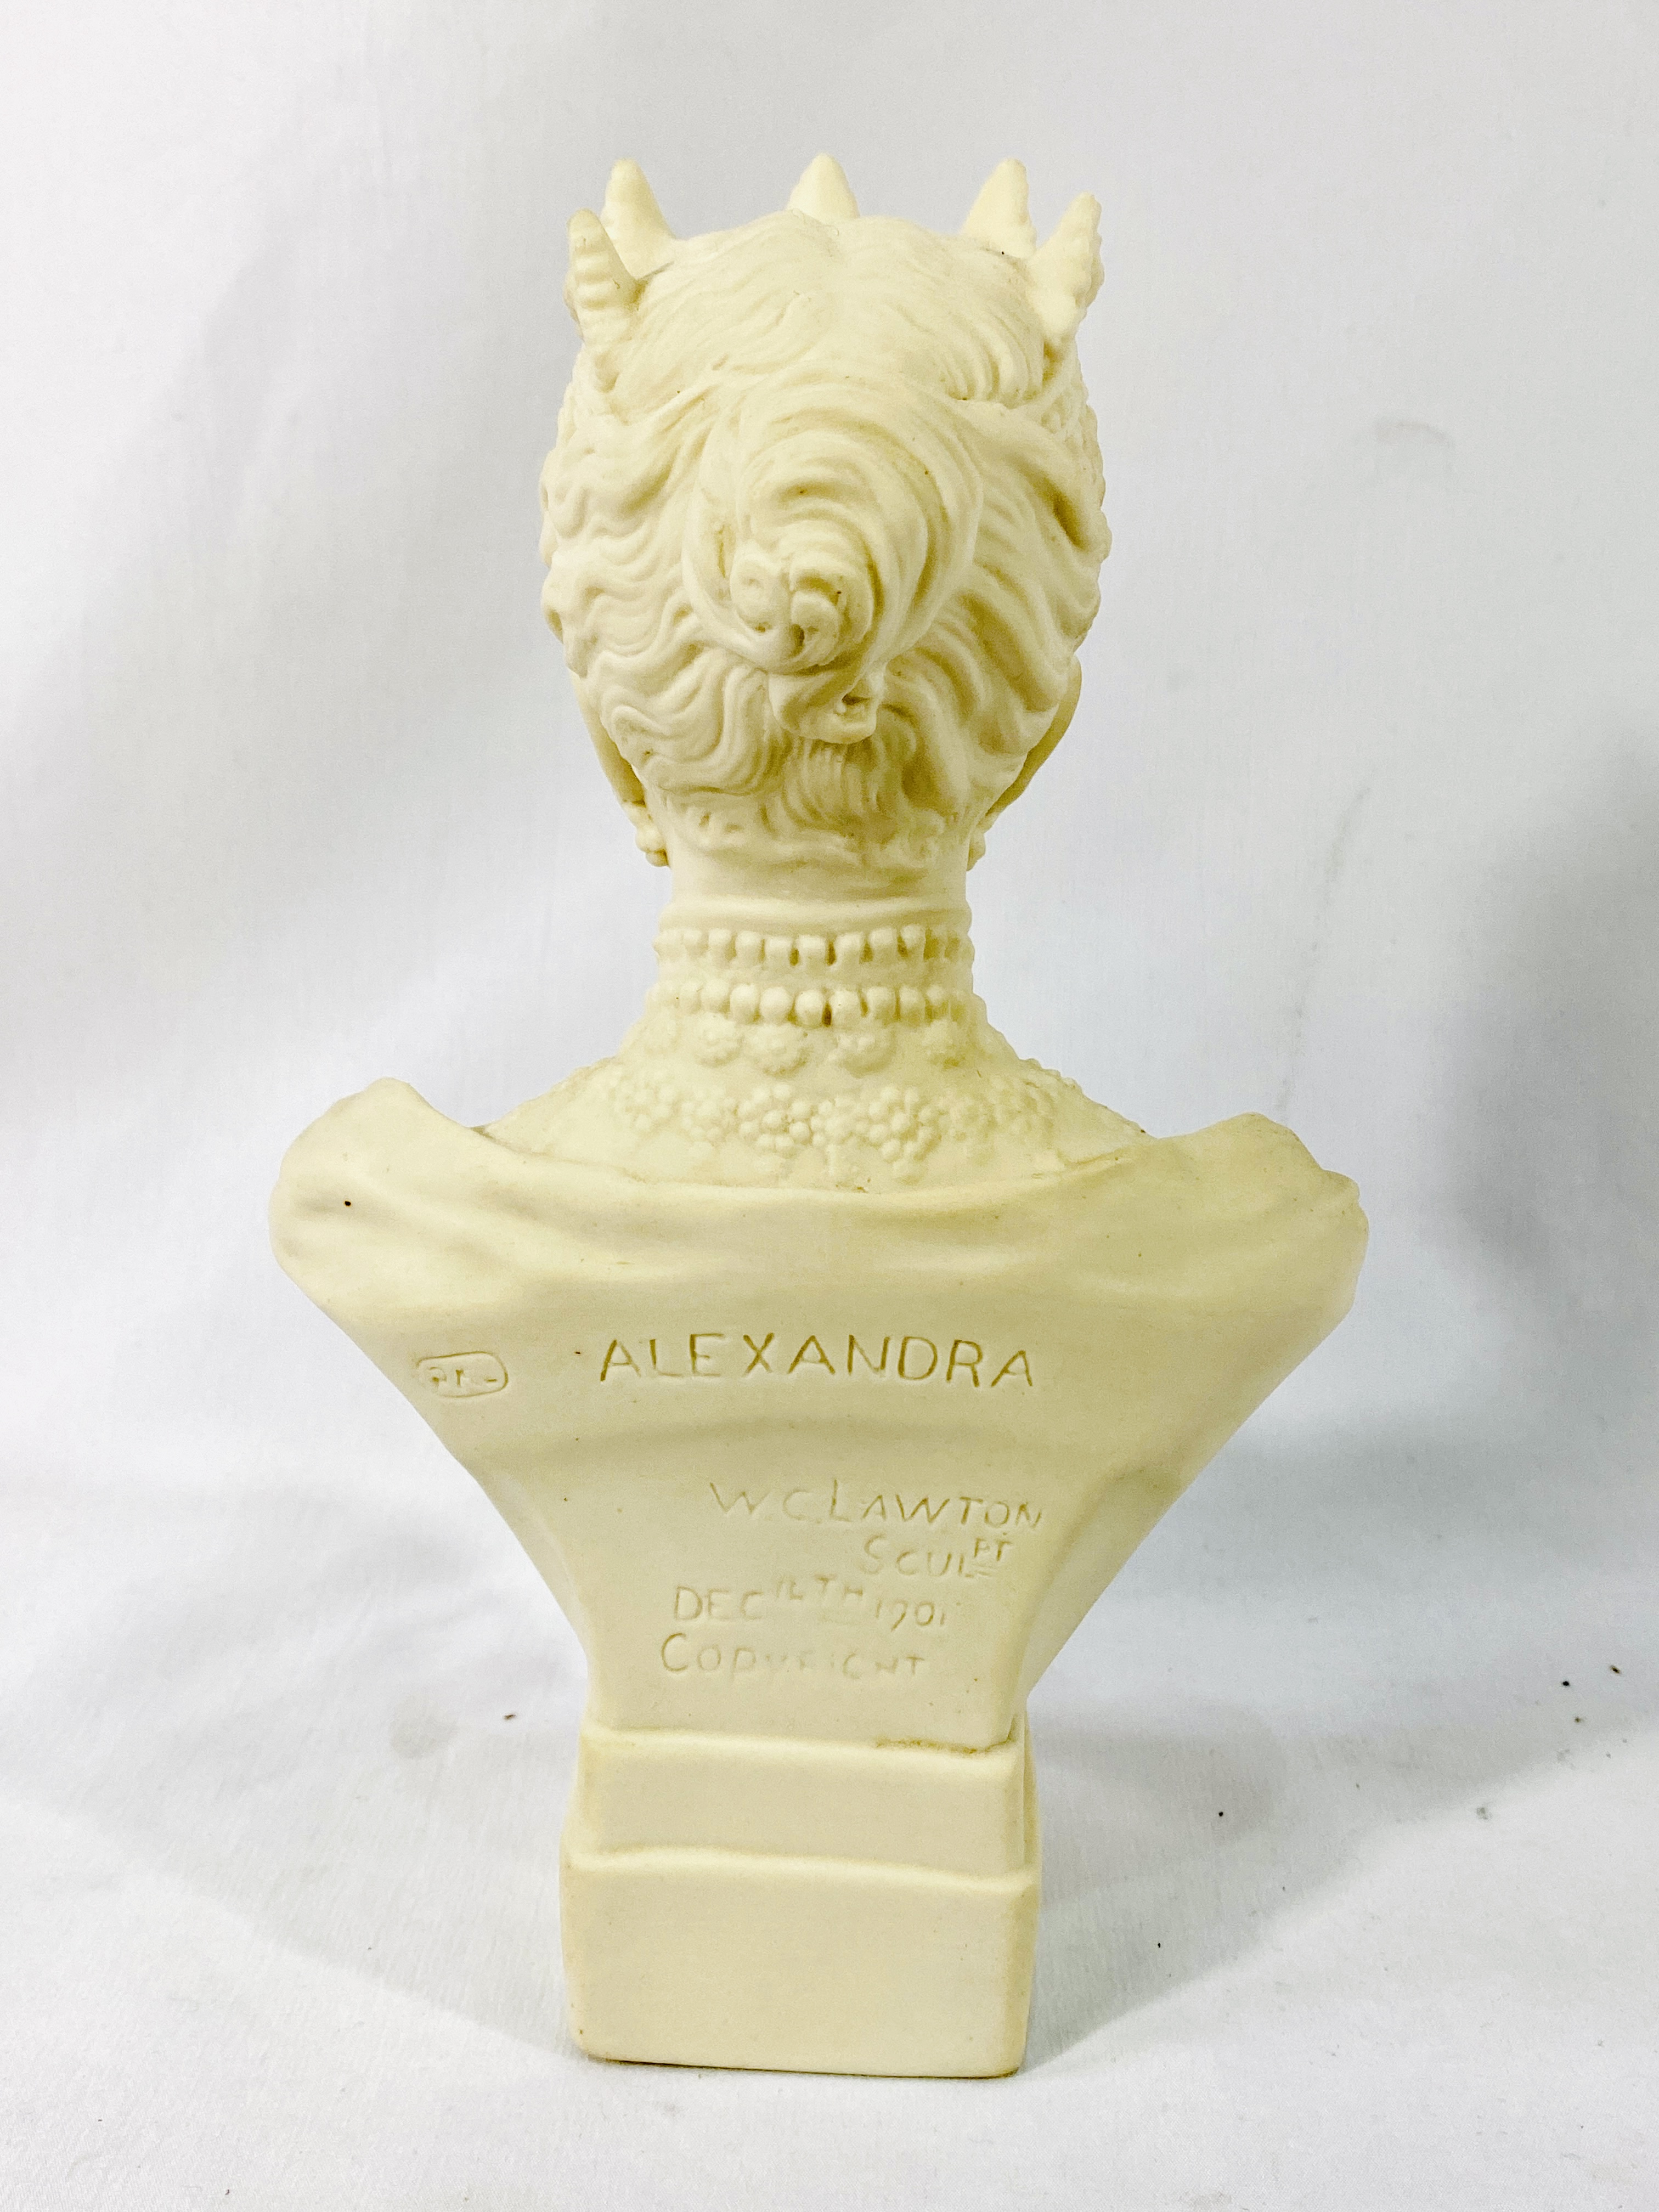 Two parian busts modelled by W.C. Lawton - Image 2 of 7